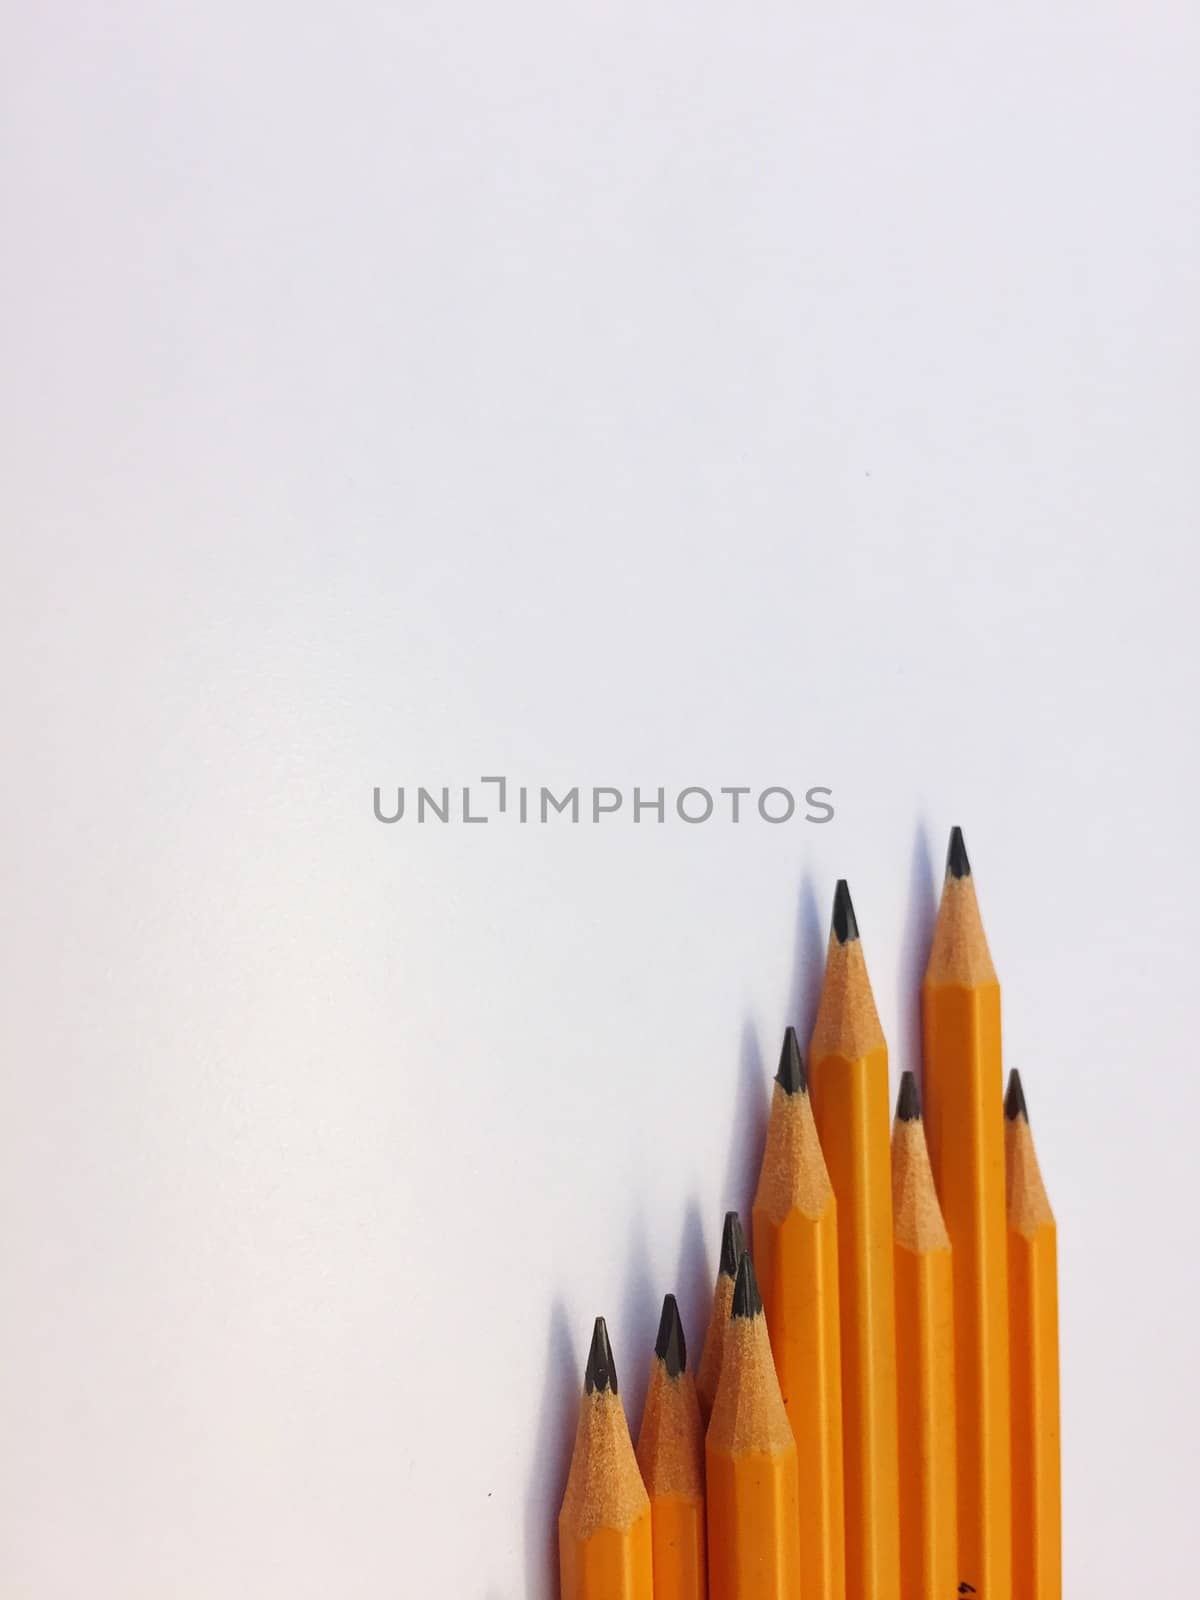 Group of yellow pencils on a white plane